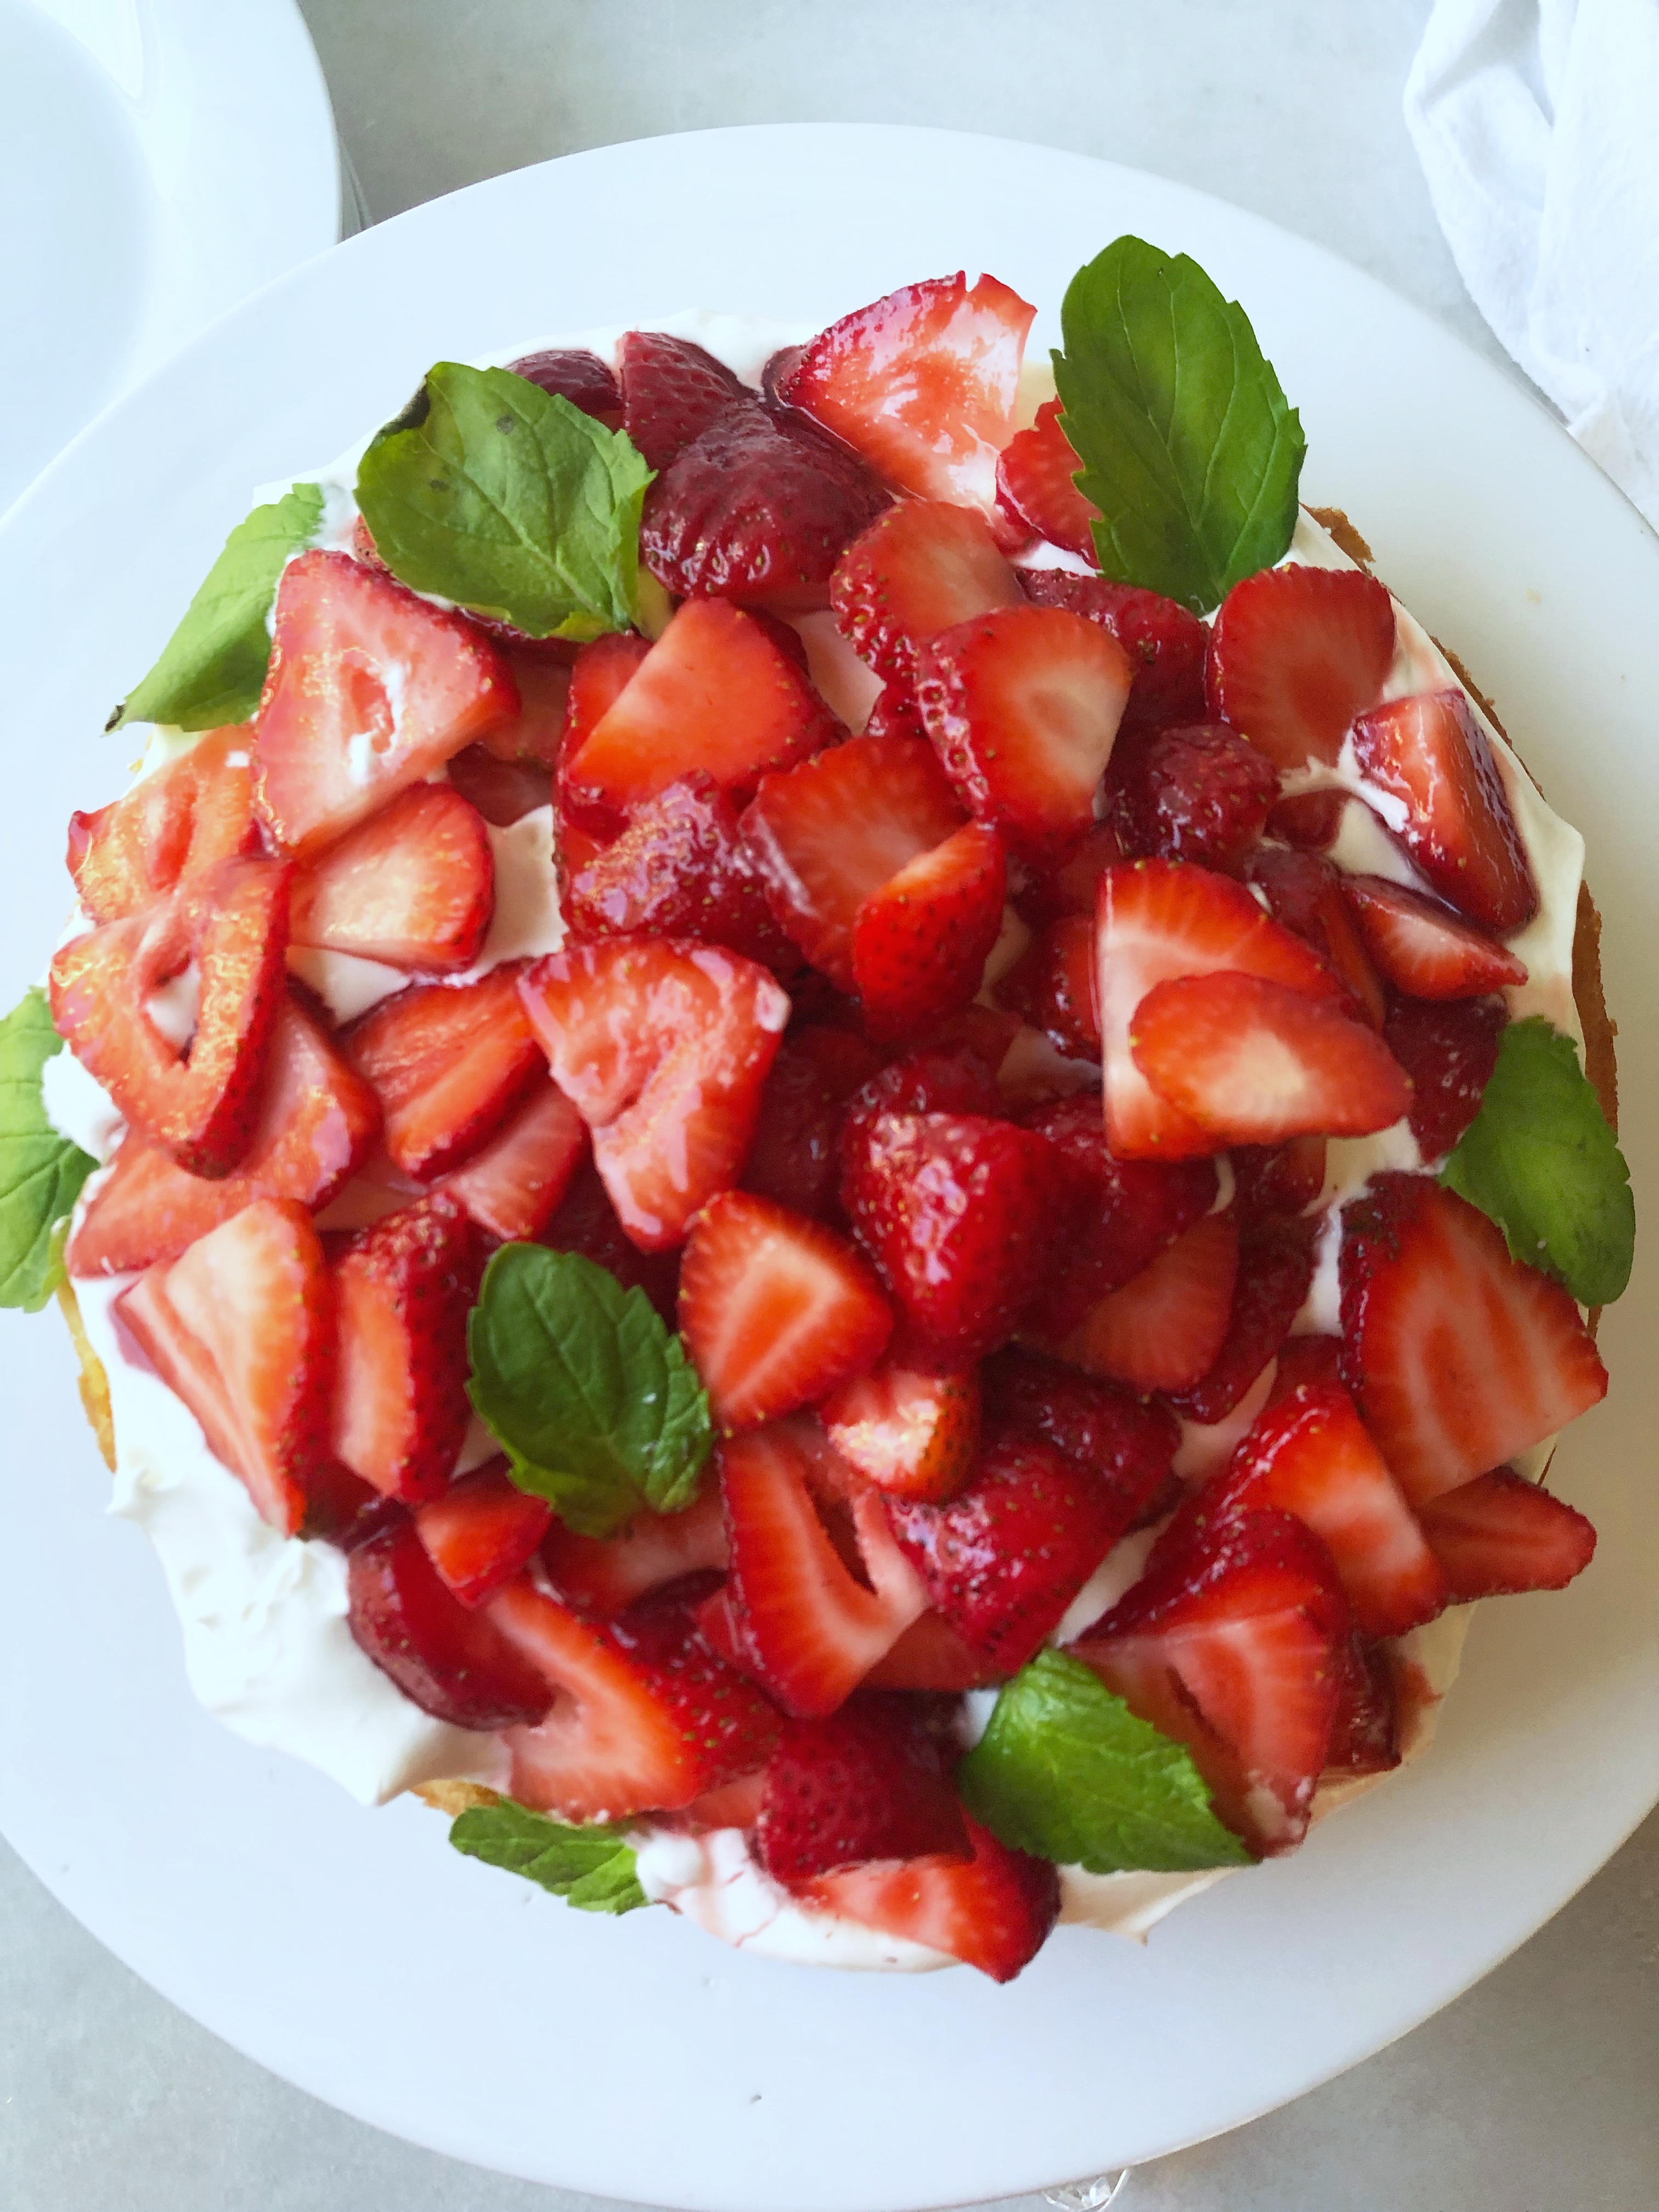 shortbread cake piled with fresh strawberries and whipped cream